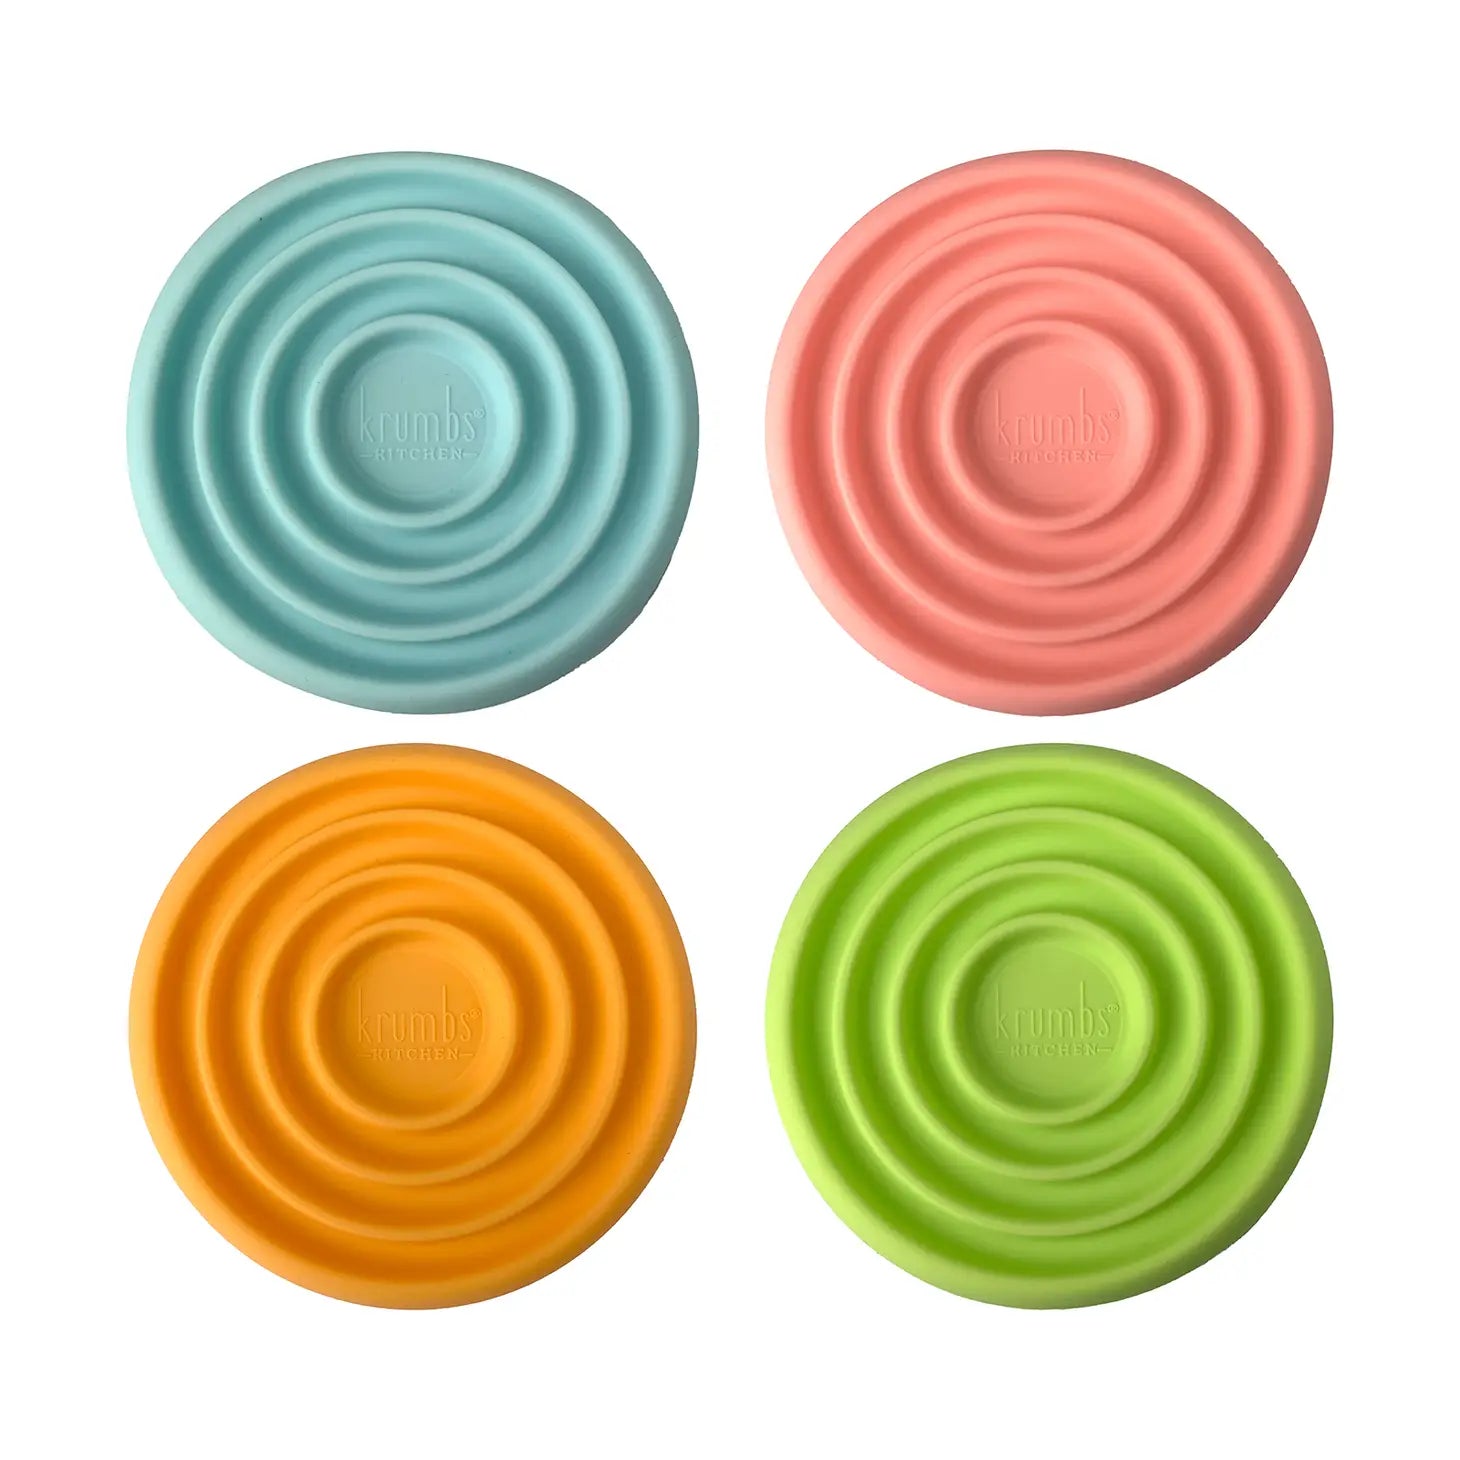 Silicone Jar Opener  - Four Colors